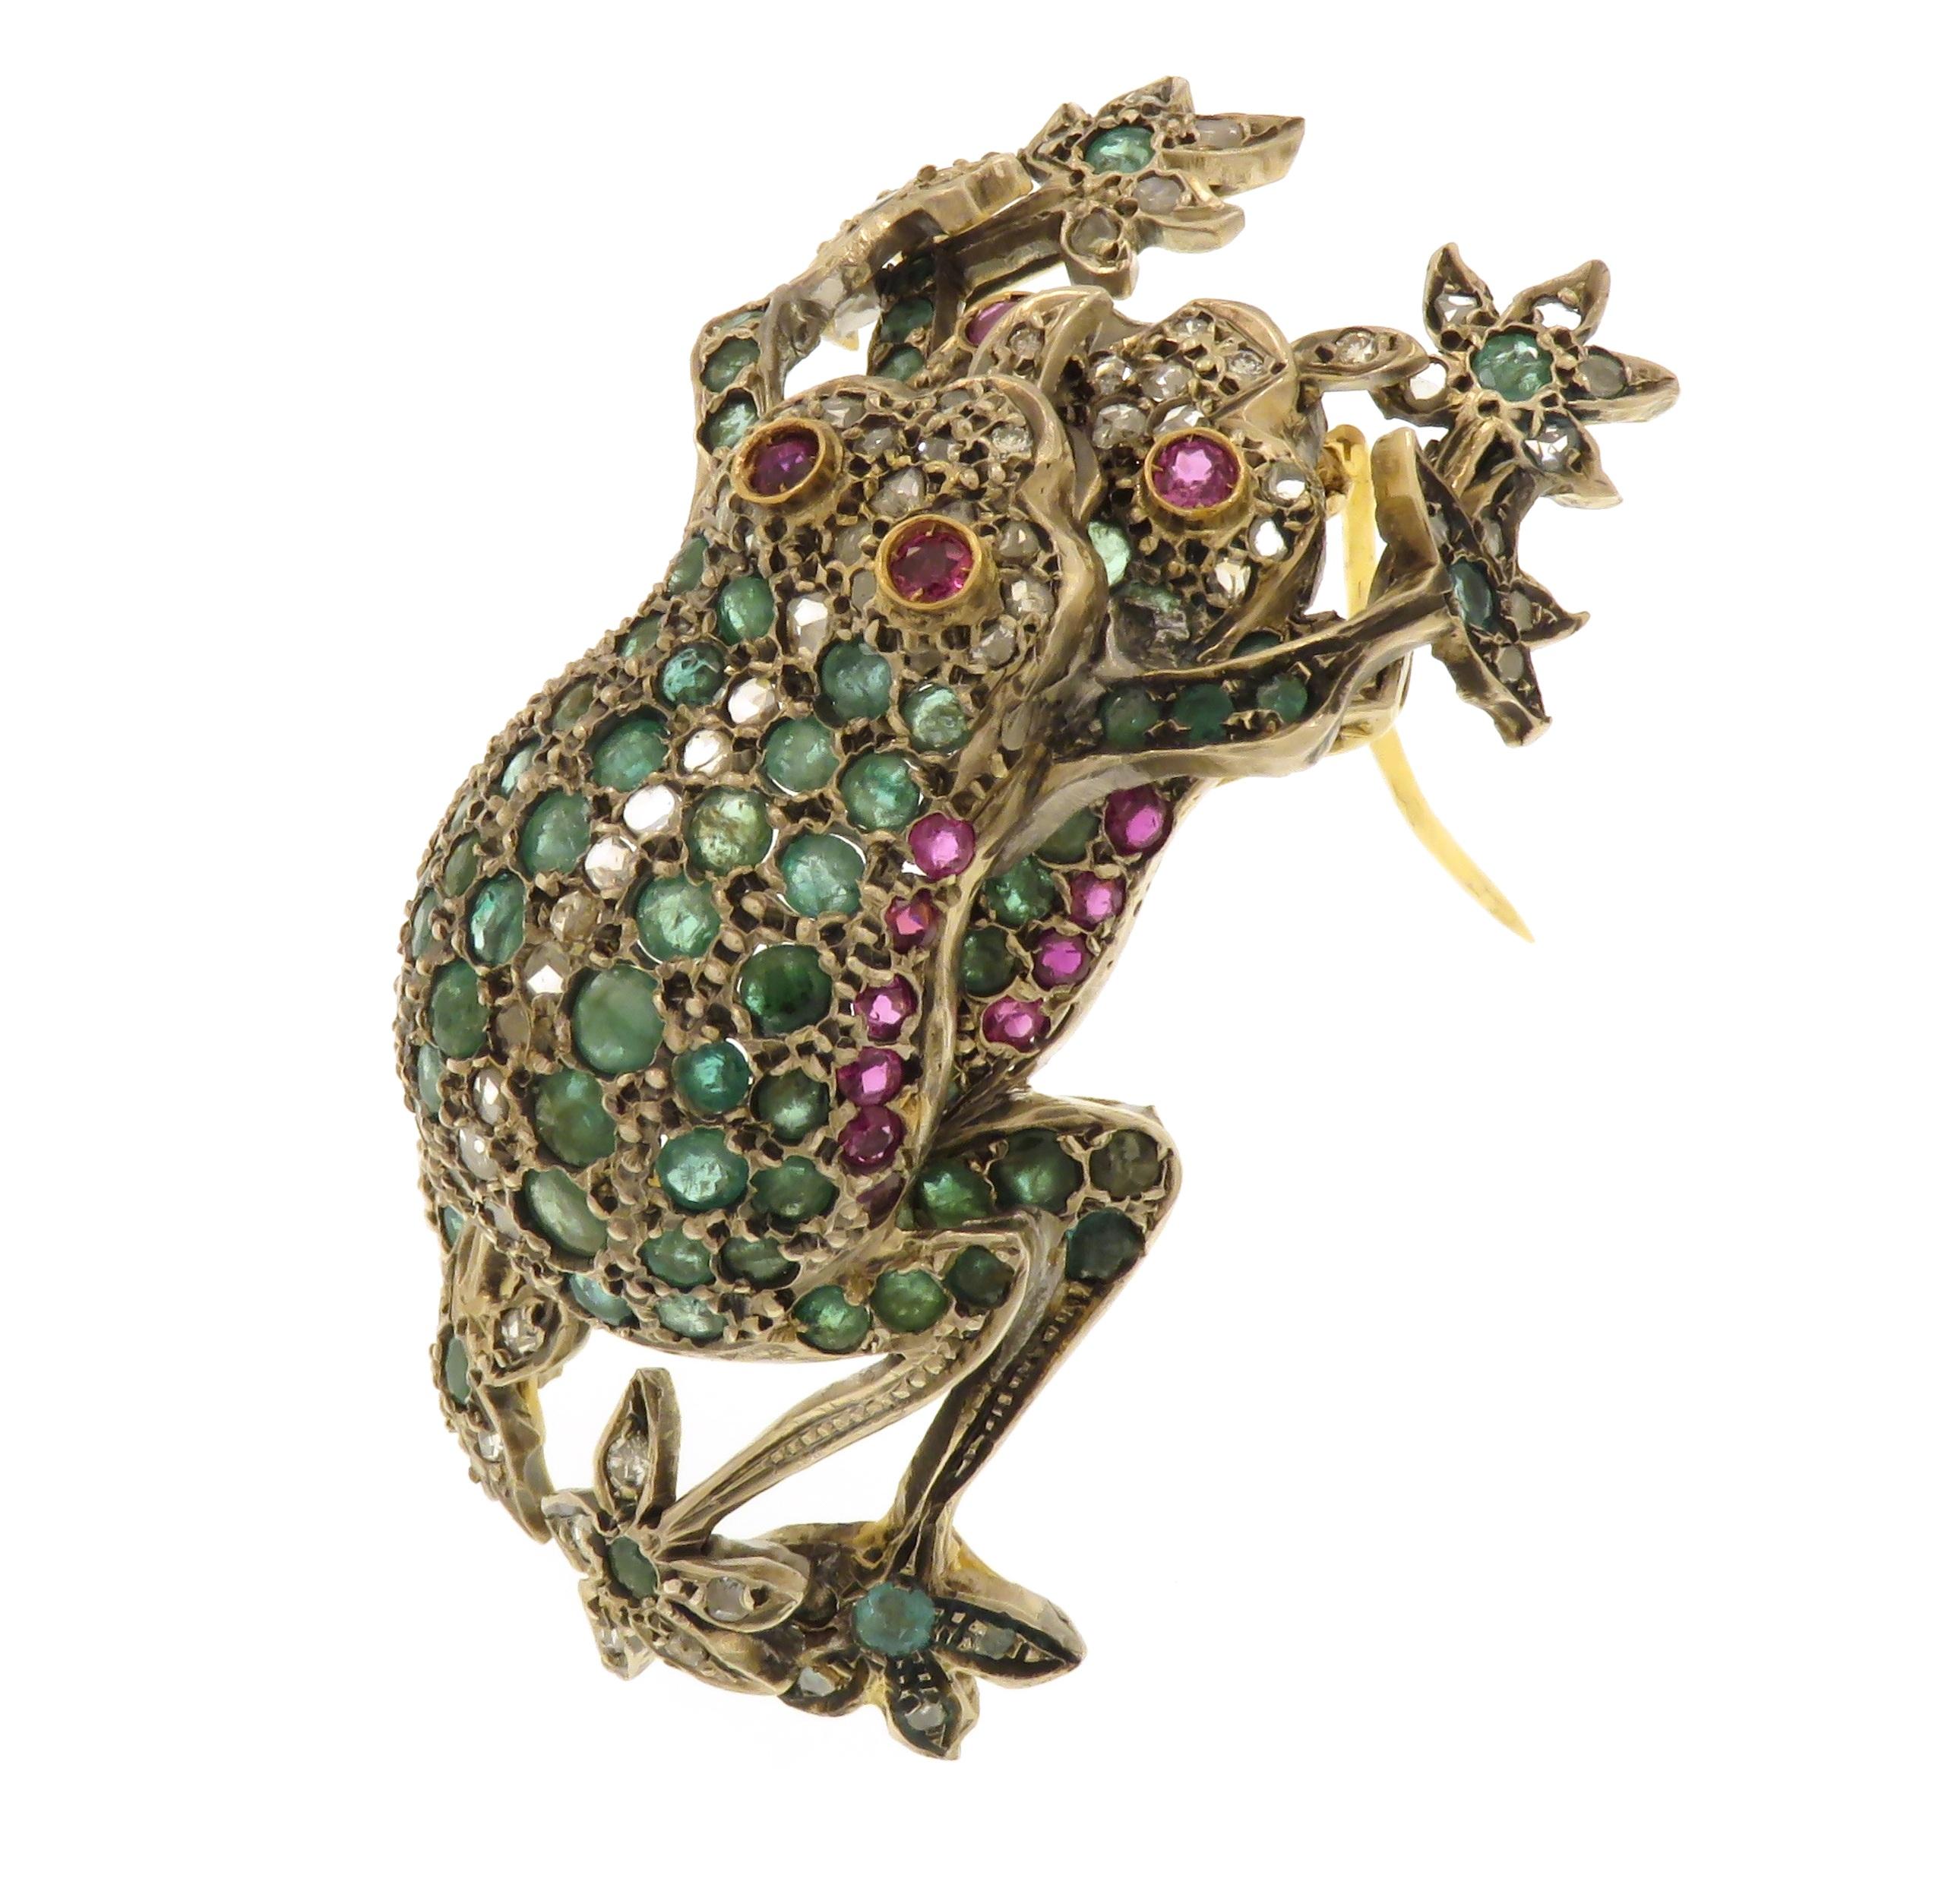 Extraordinary antique brooch dating from about 1920 hand-created in silver and 18k yellow gold with 78 diamonds, 94 emeralds and 24 rubies. It is definitely a finely crafted unique brooch depicting two overlapping frogs completely set with precious